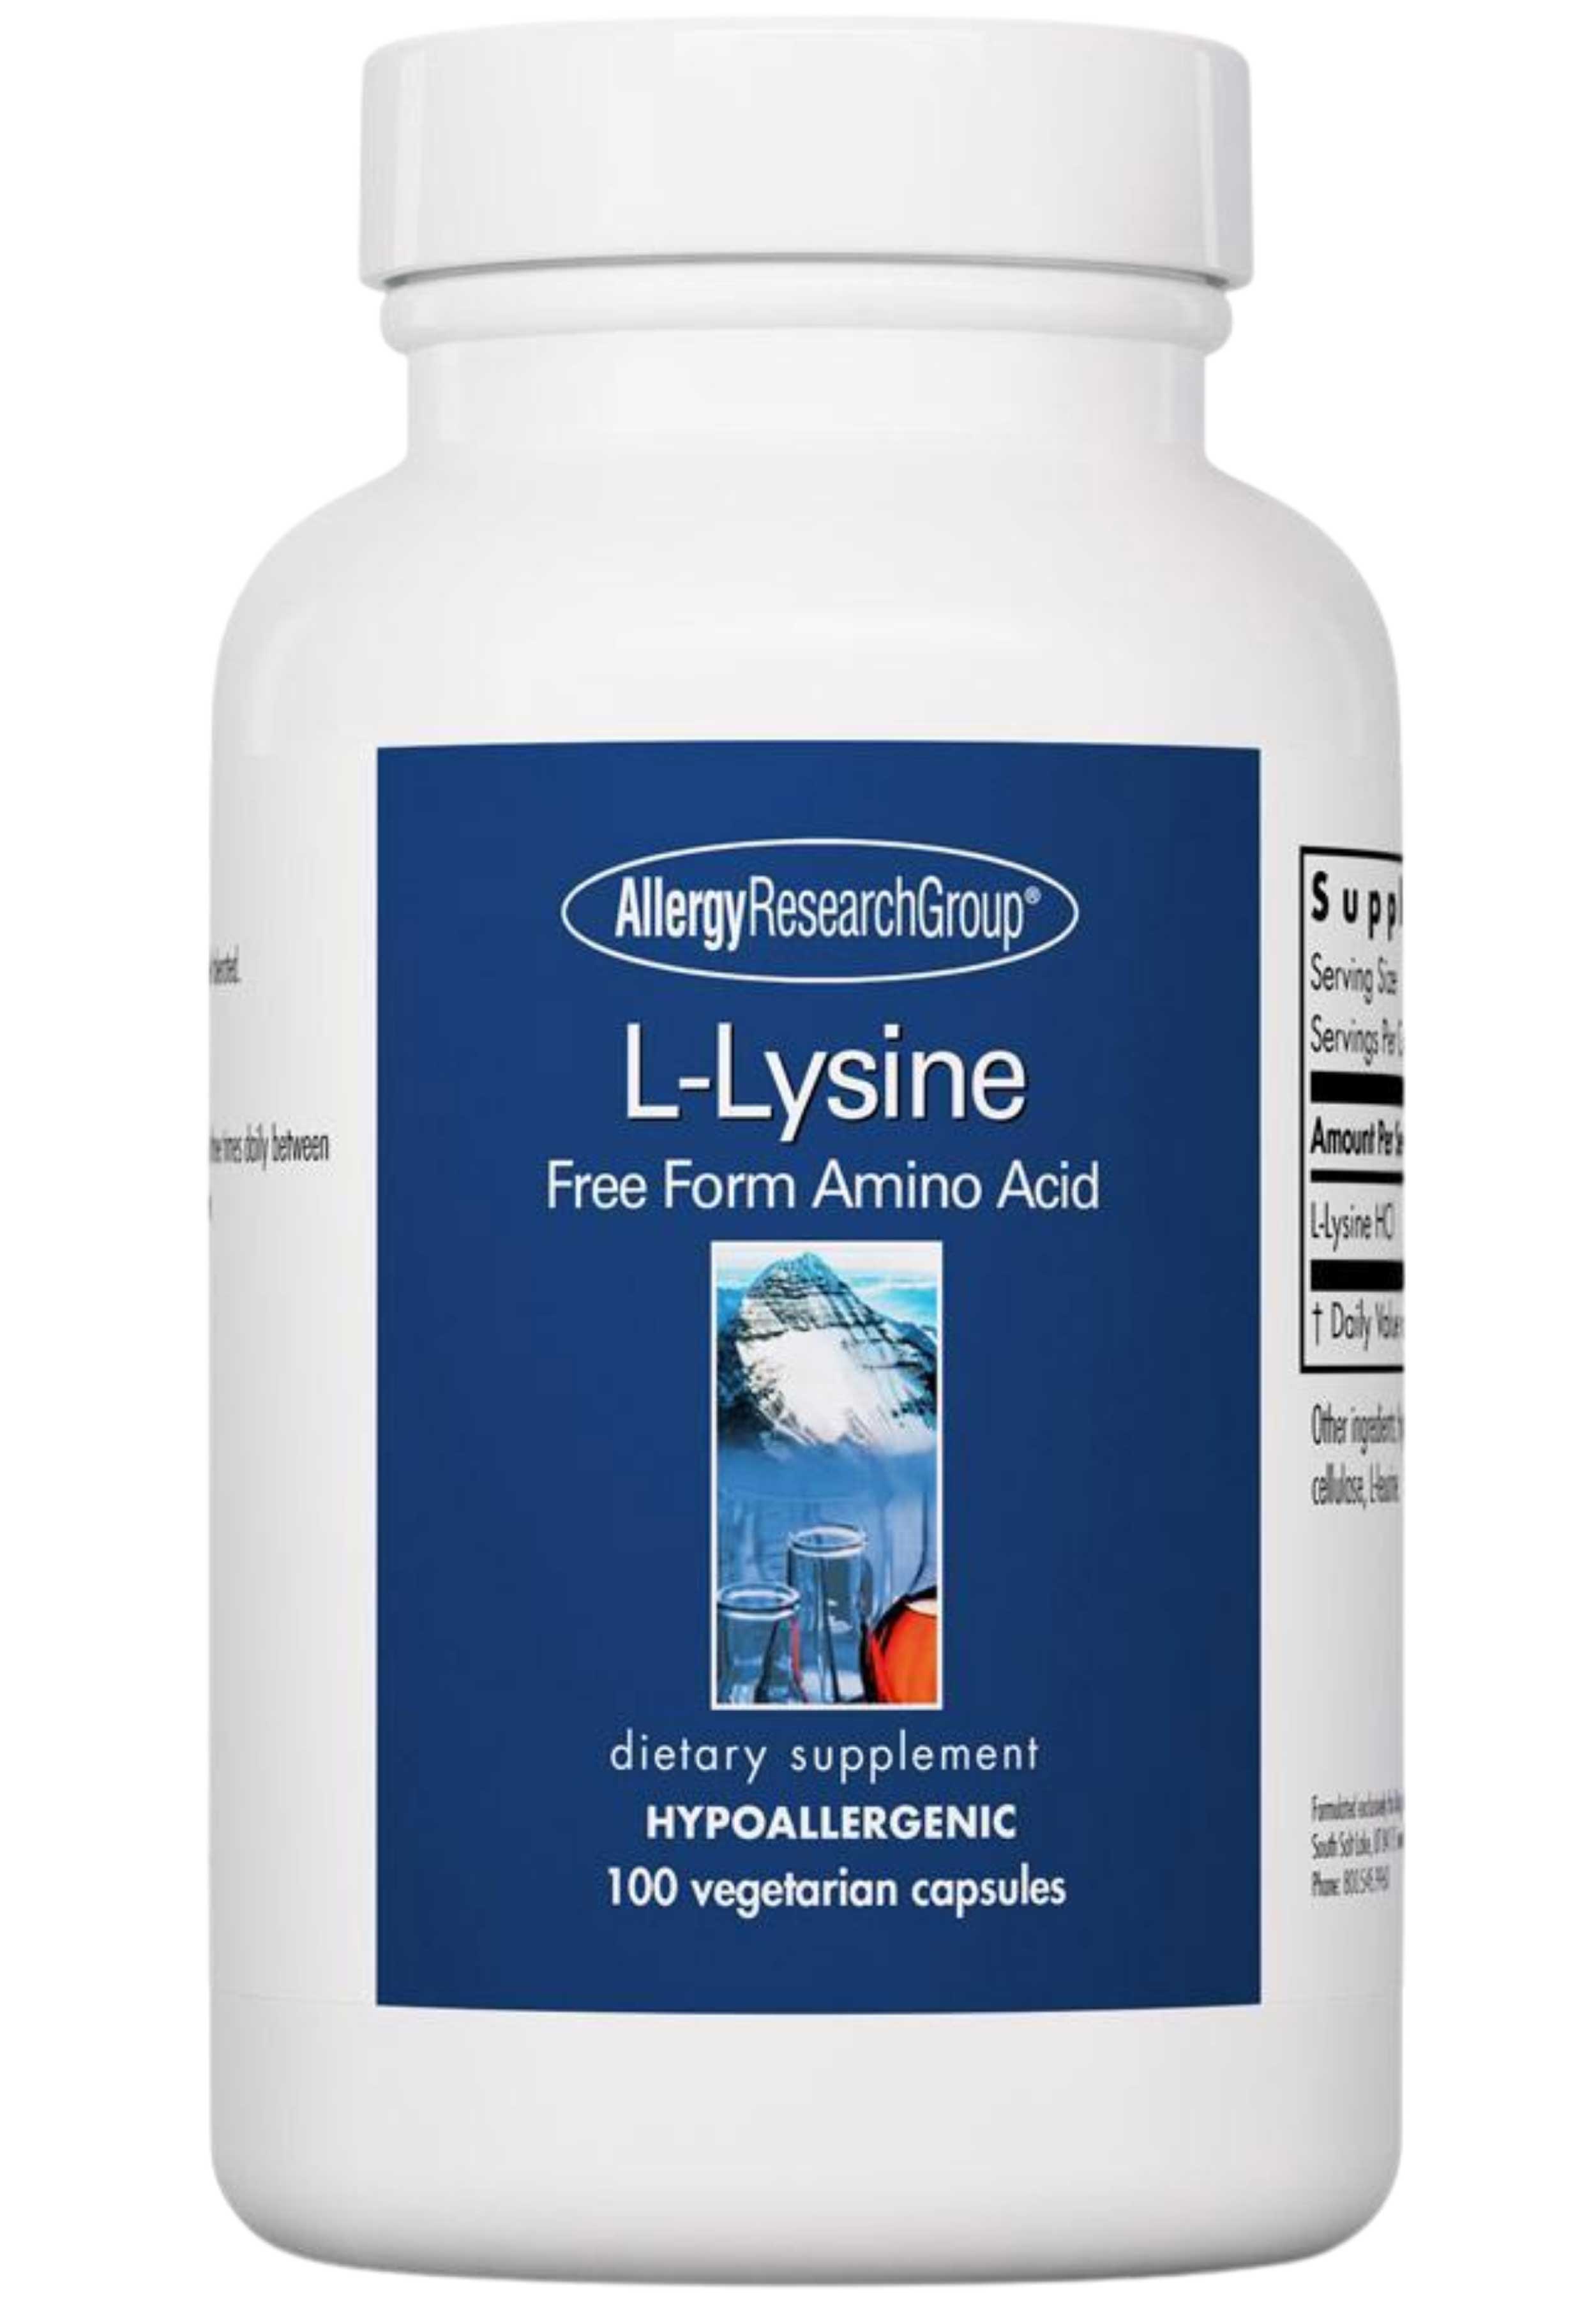 Allergy Research Group L-Lysine